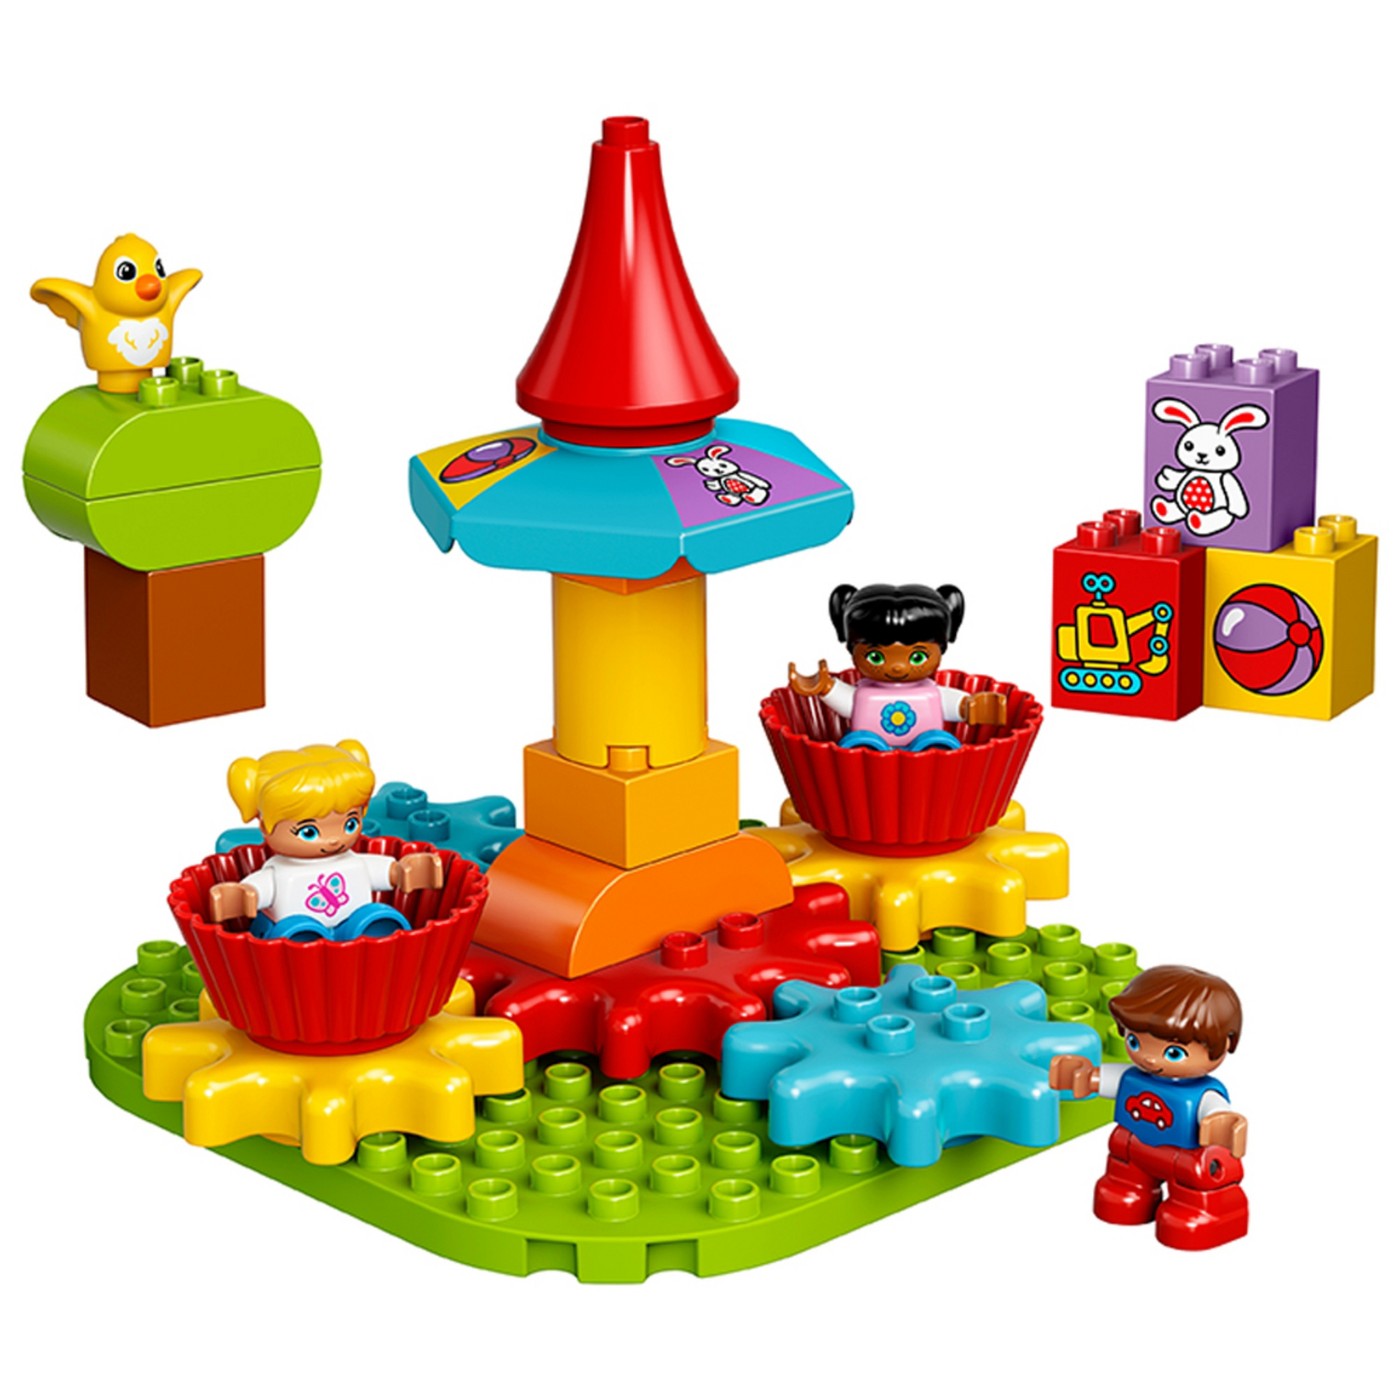 LEGO® DUPLO® My First Carousel Only $13.98! (Reg $24.99)